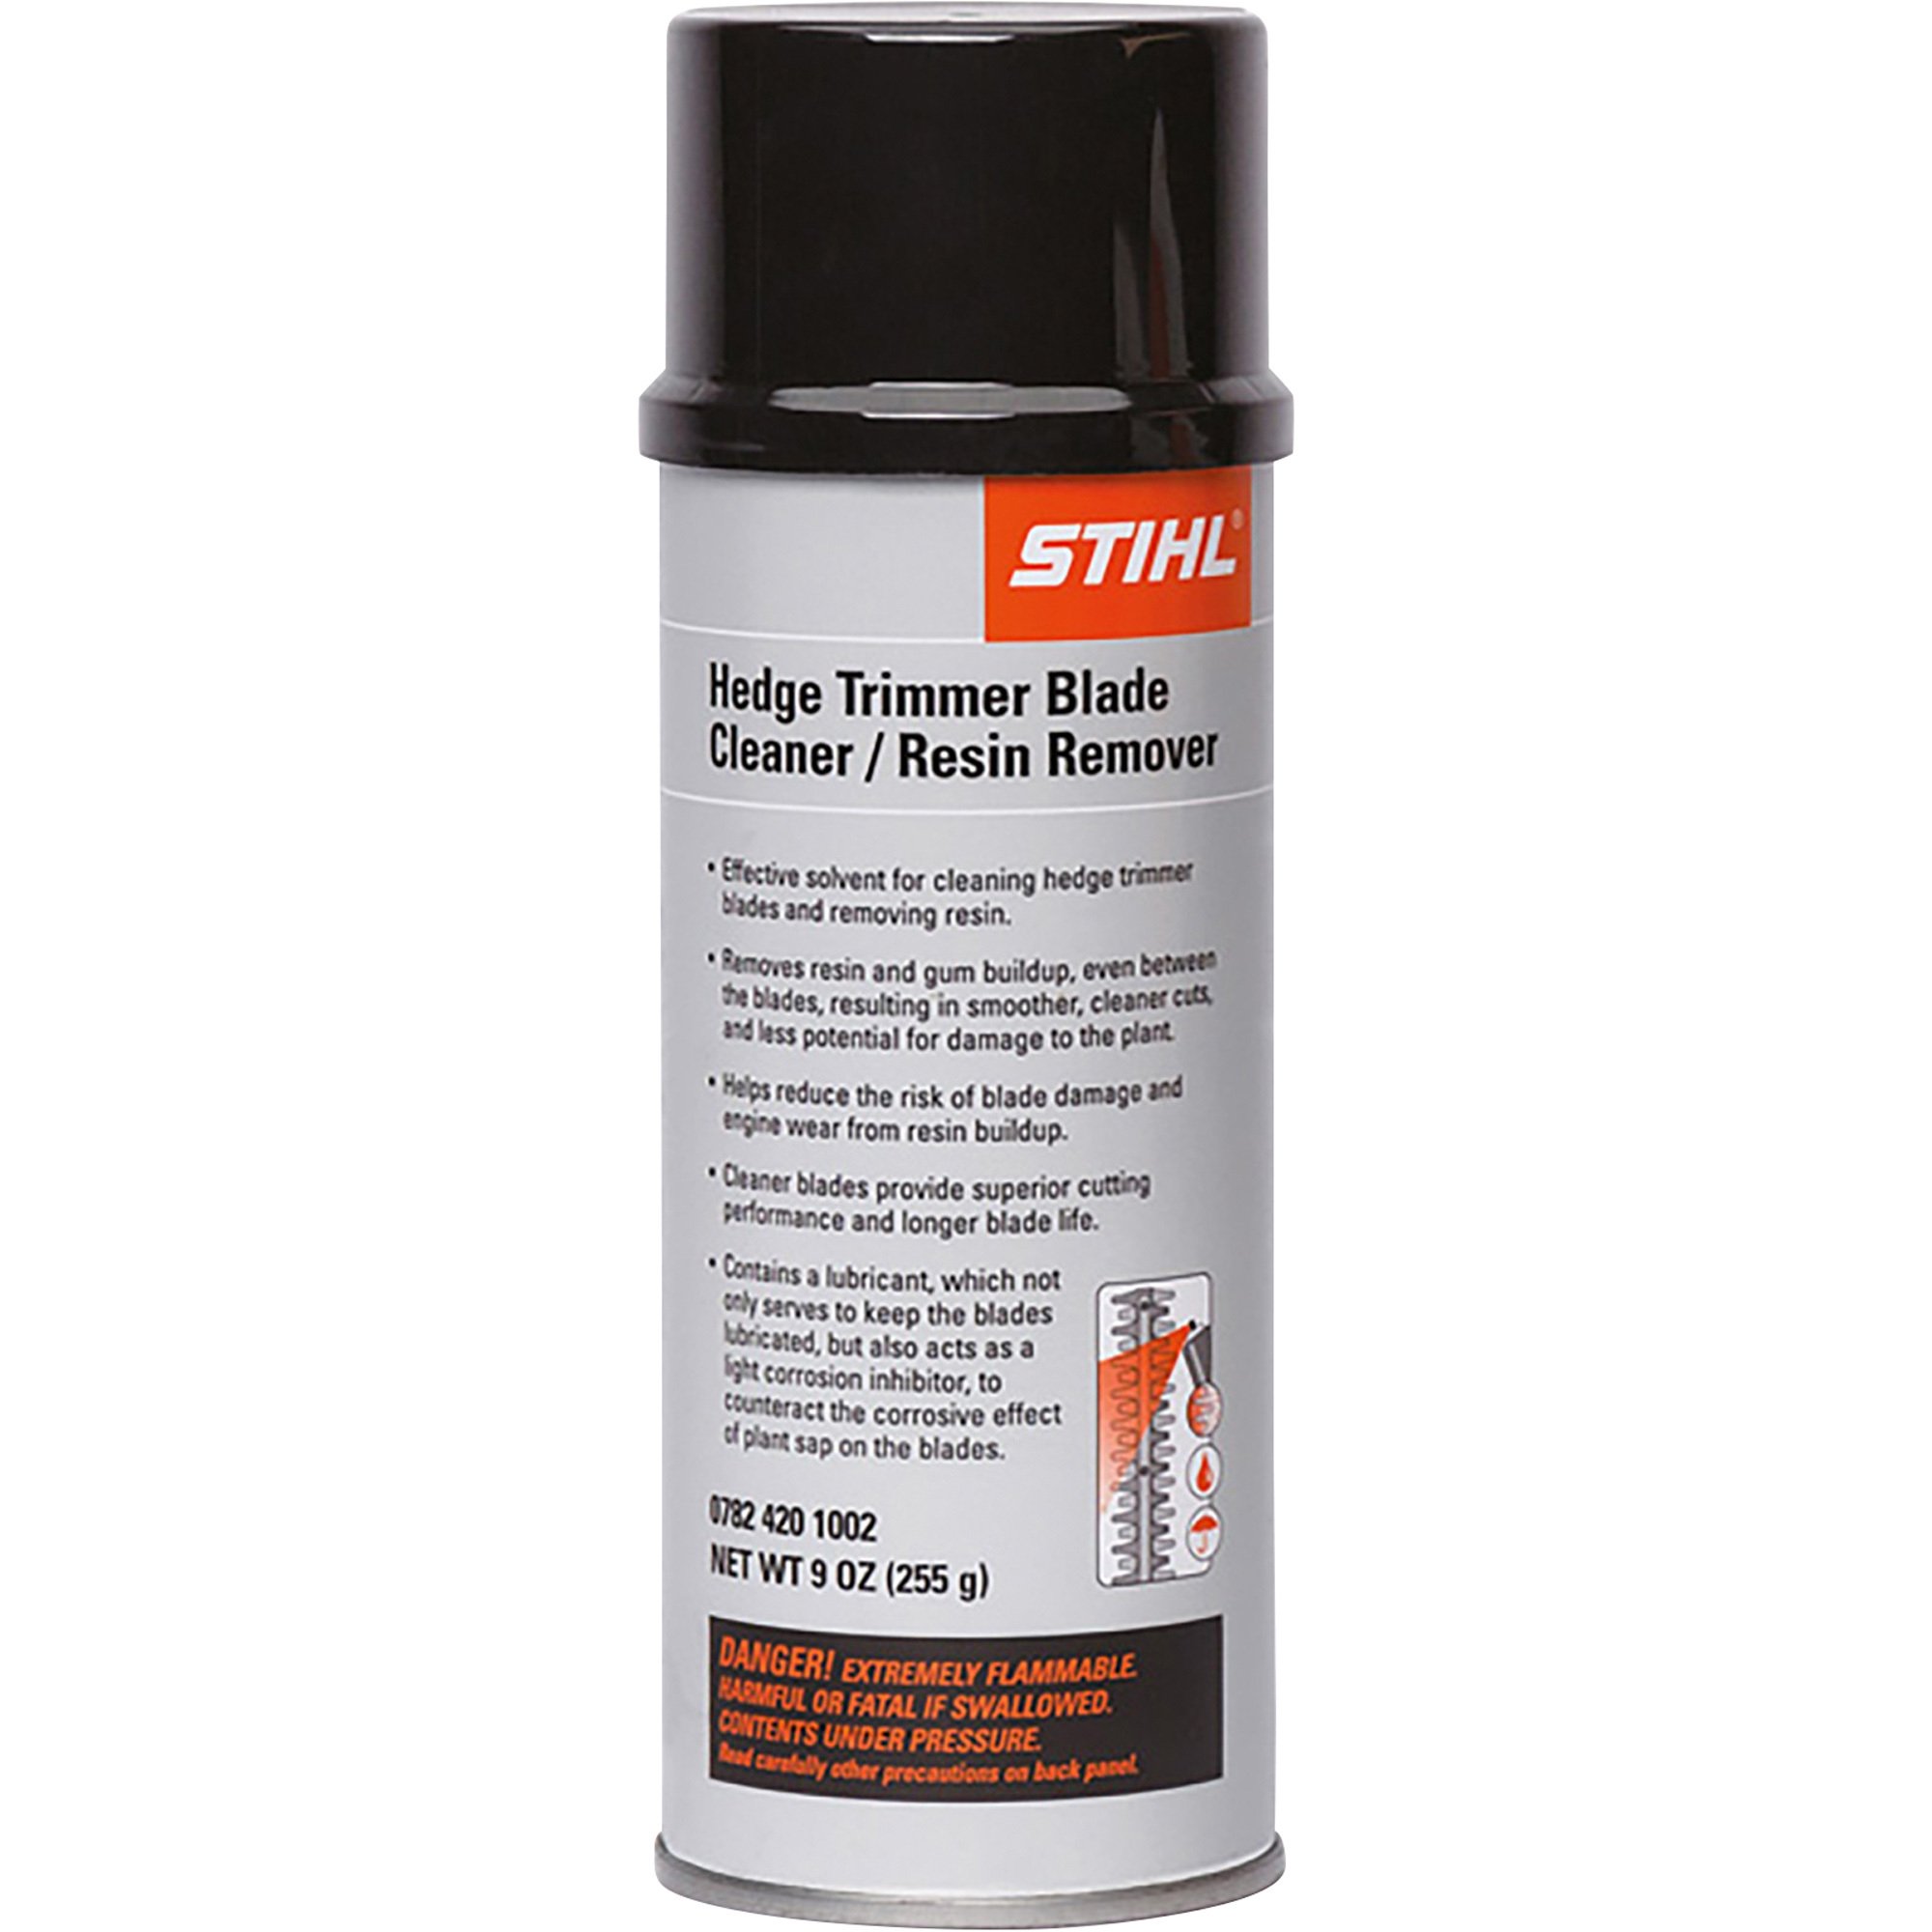 STIHL Hedge Trimmer Blade Cleaner/Resin Remover — 9oz. Can